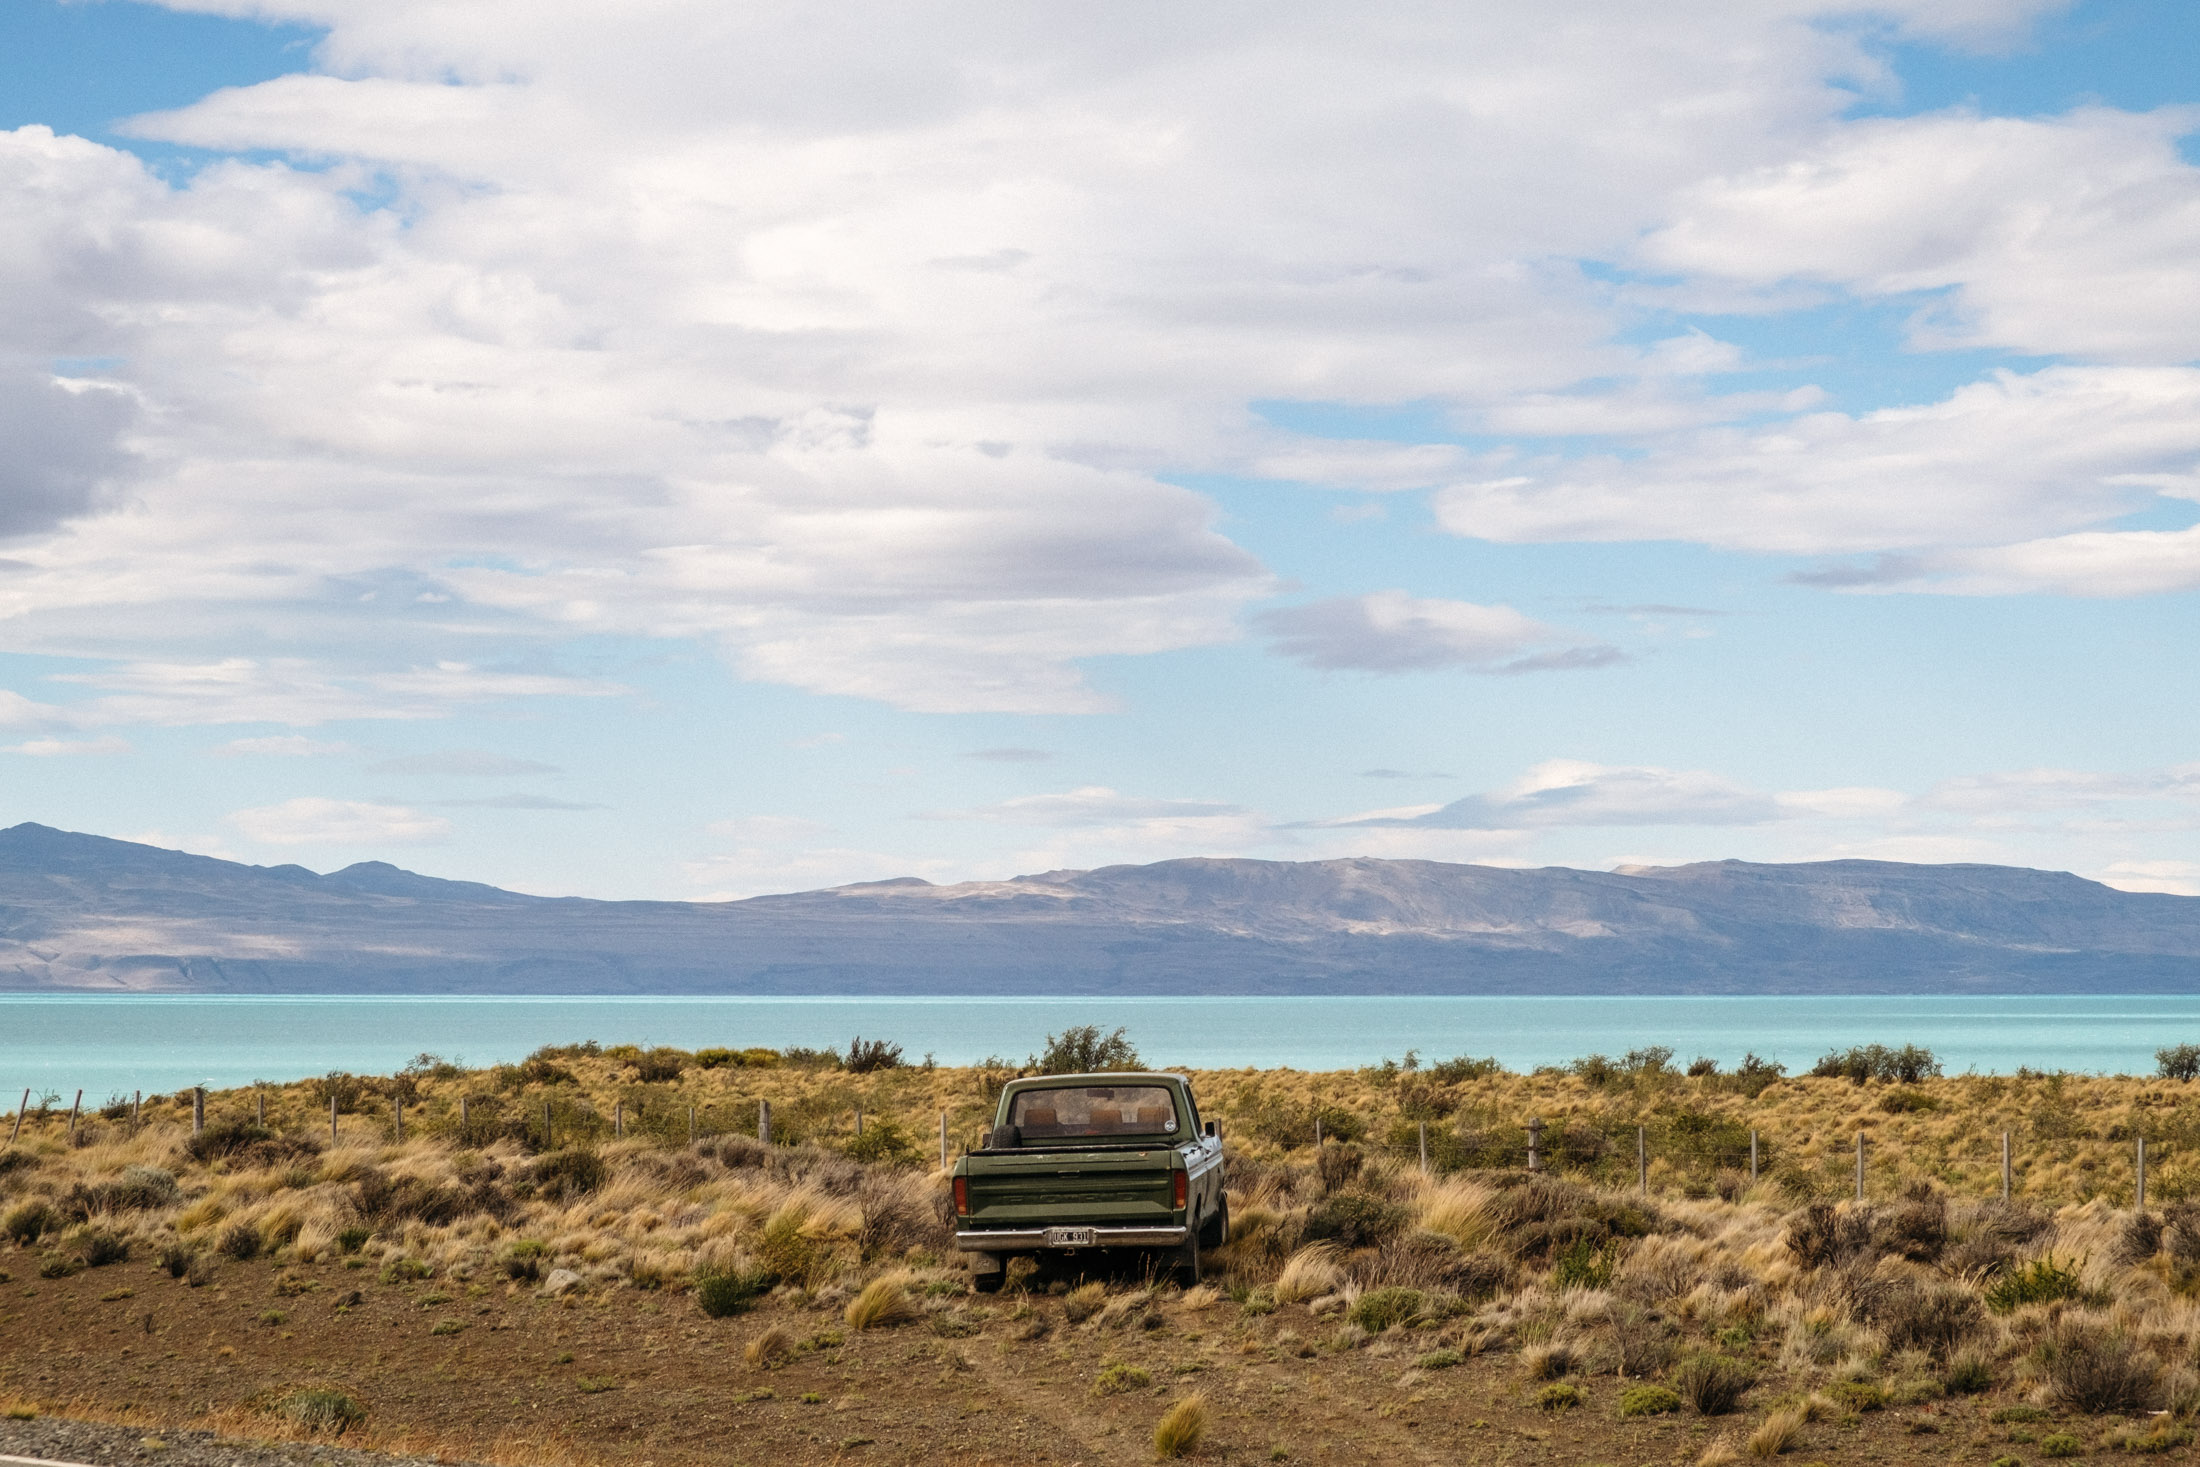 Patagonian landscape with Lake Argentina